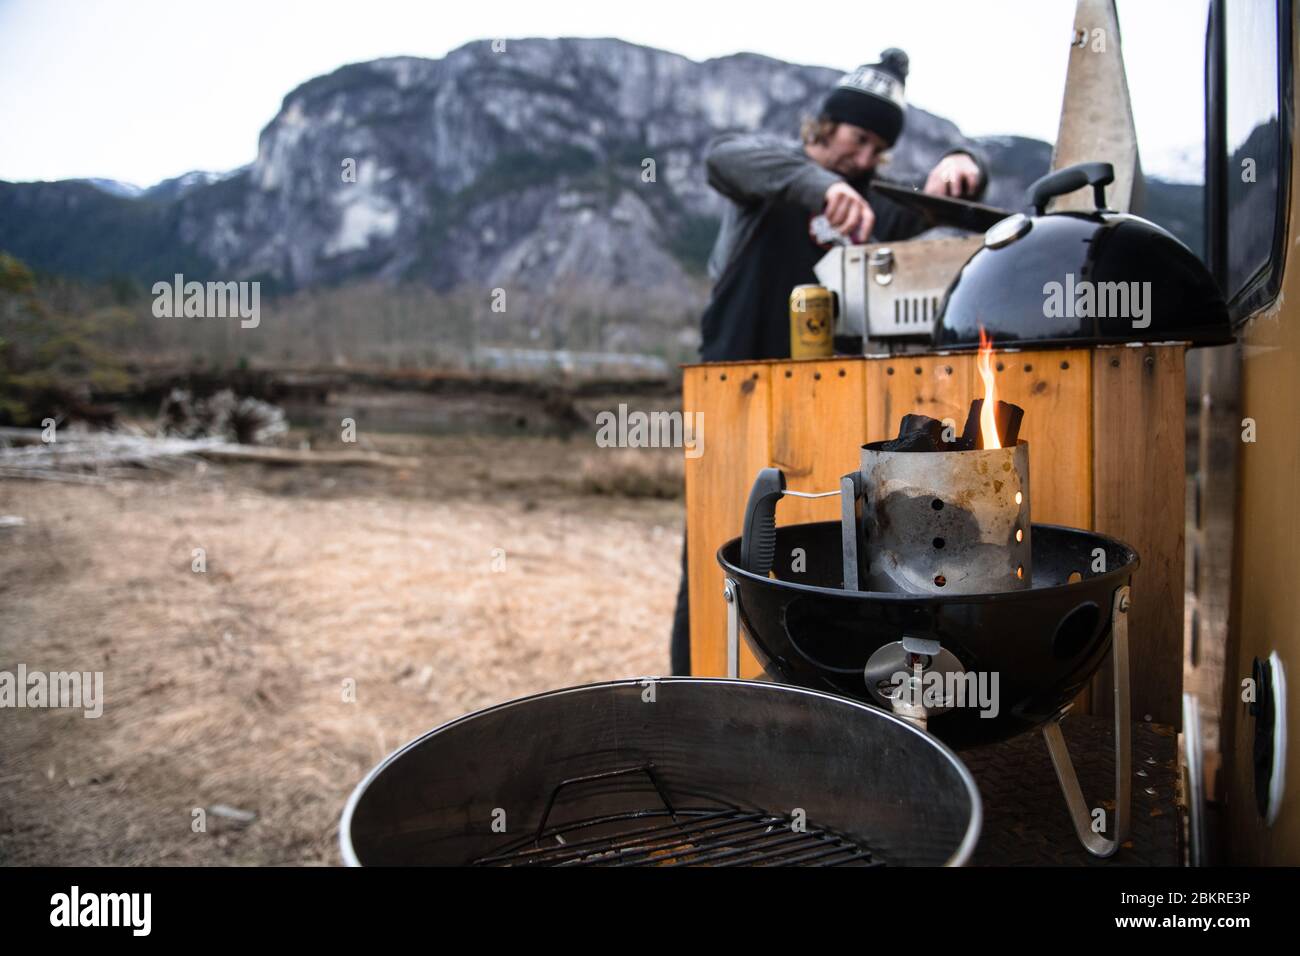 A man cooking on a barbeque set  up at the back of the campervan in a wintry landscape. Stock Photo